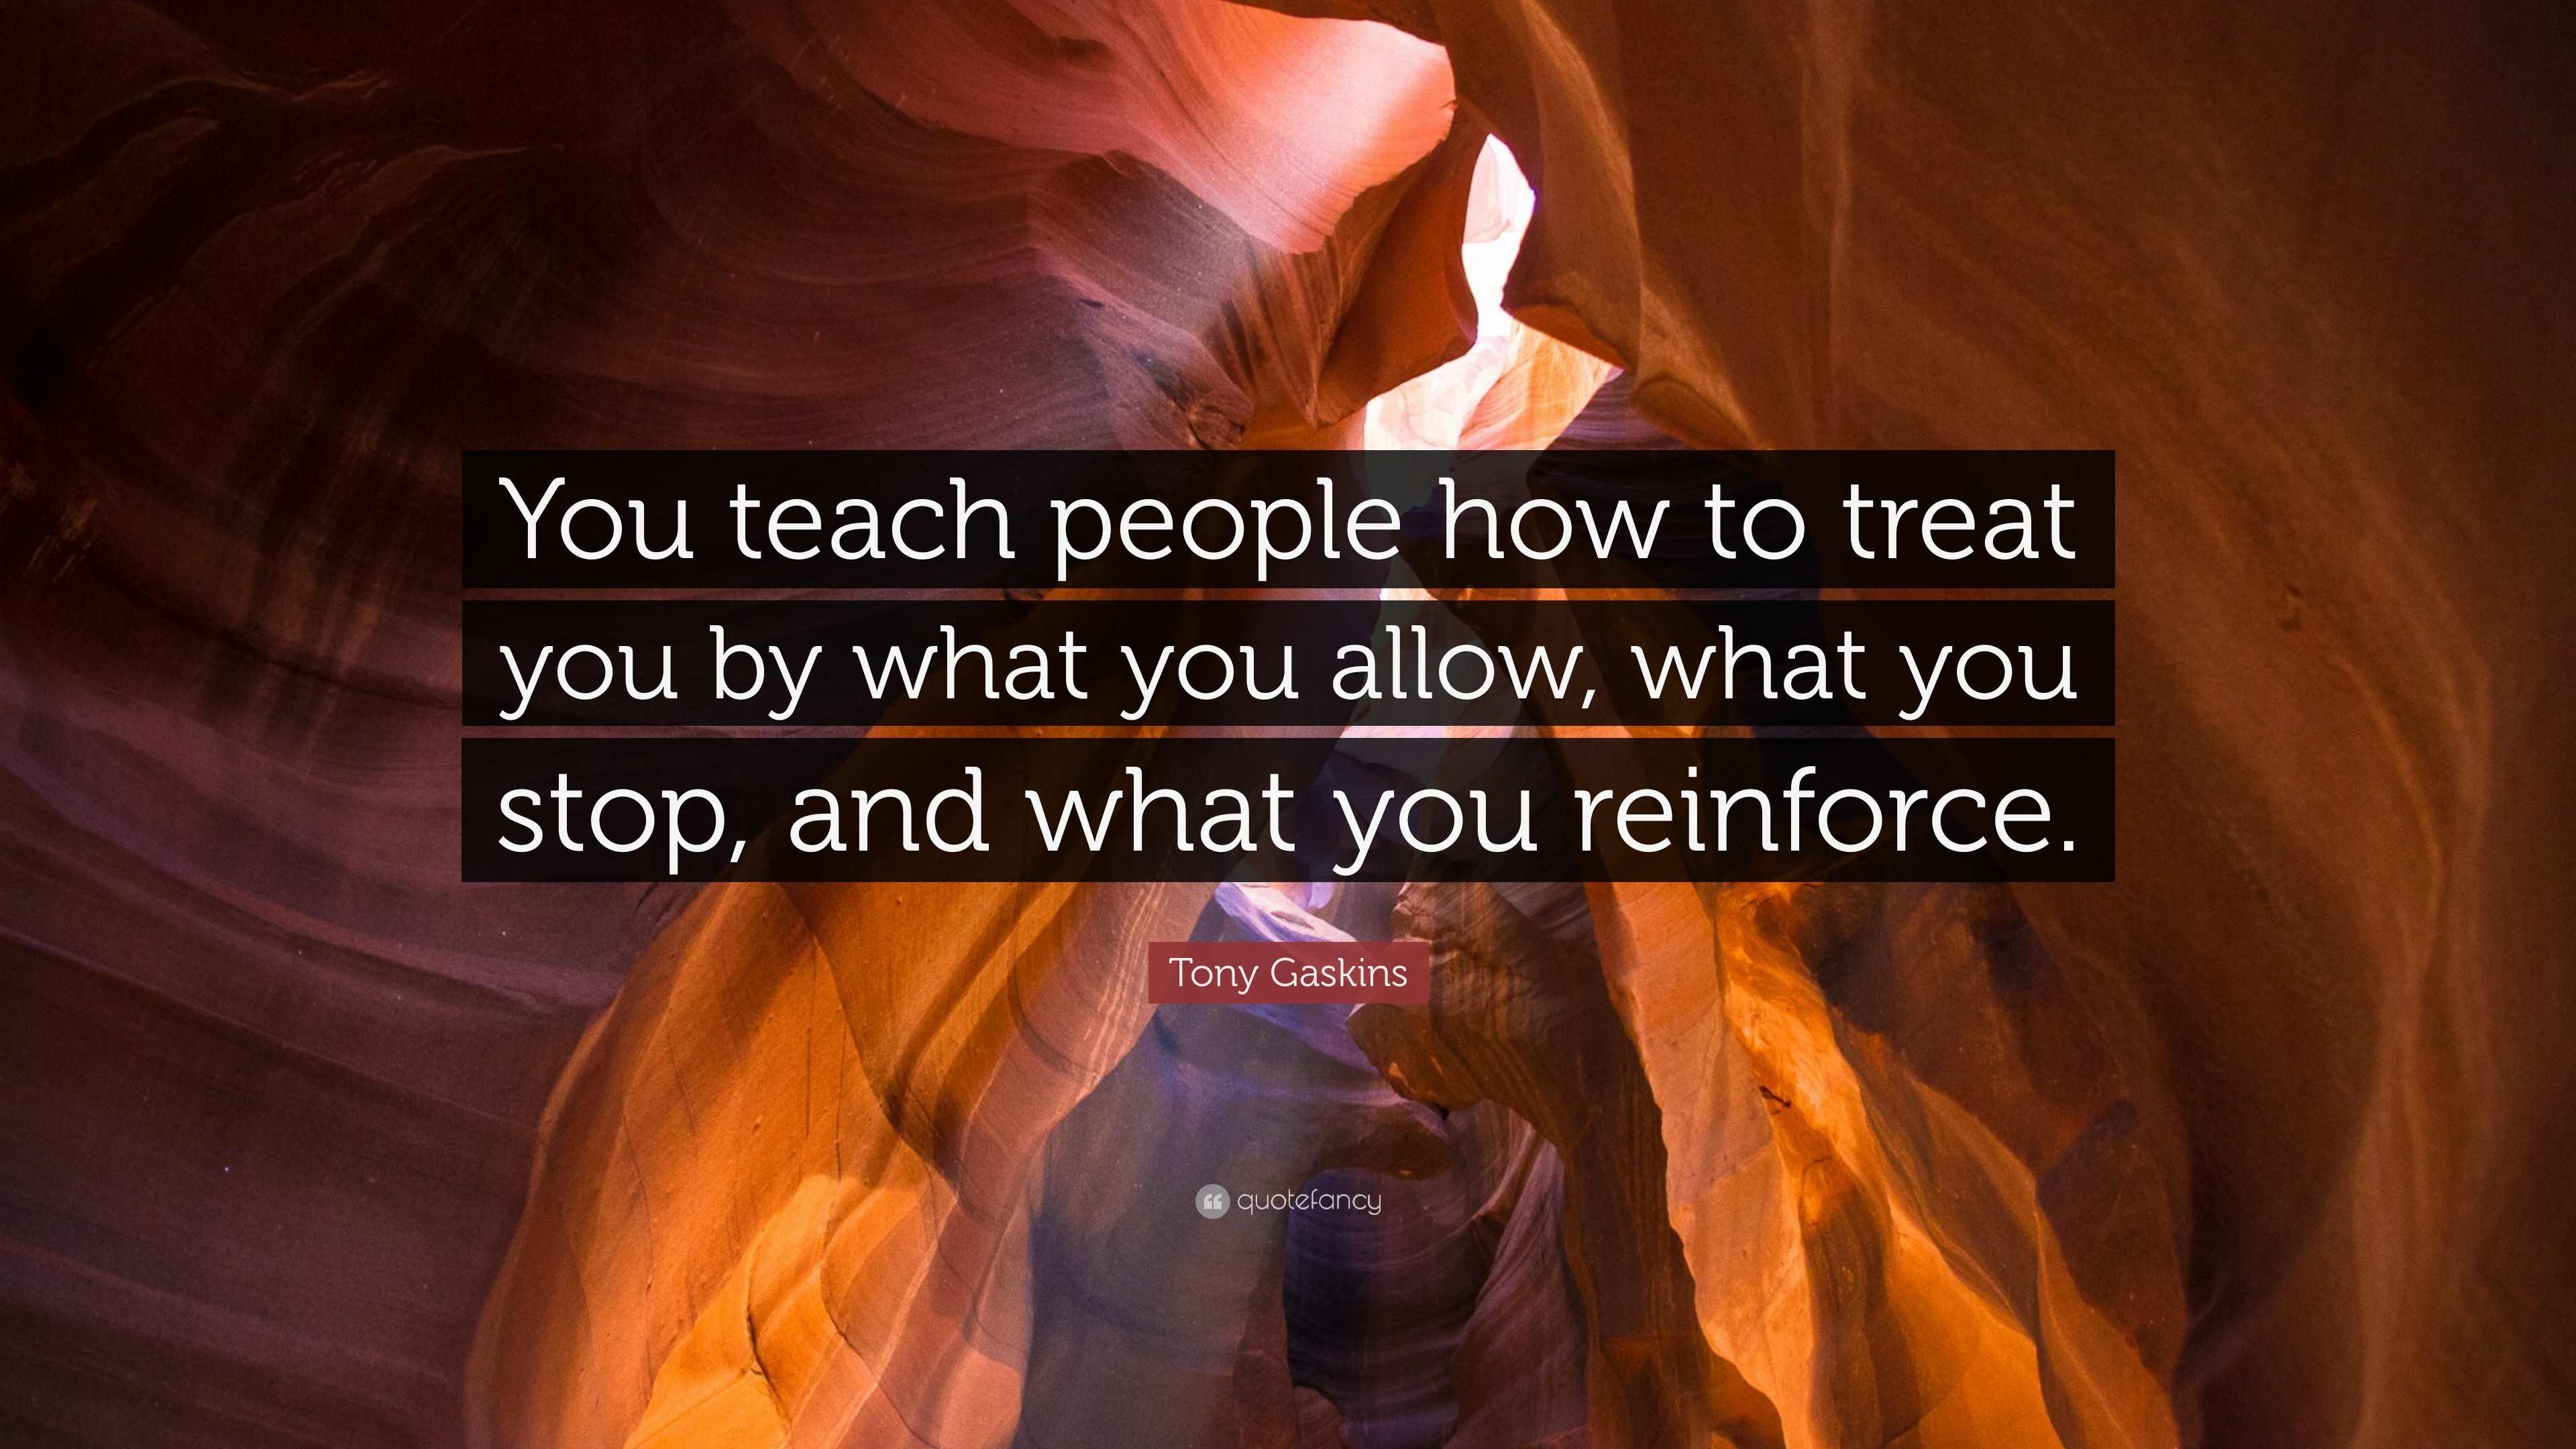 Tony Gaskins Quote “you Teach People How To Treat You By What You Allow What You Stop And 8222